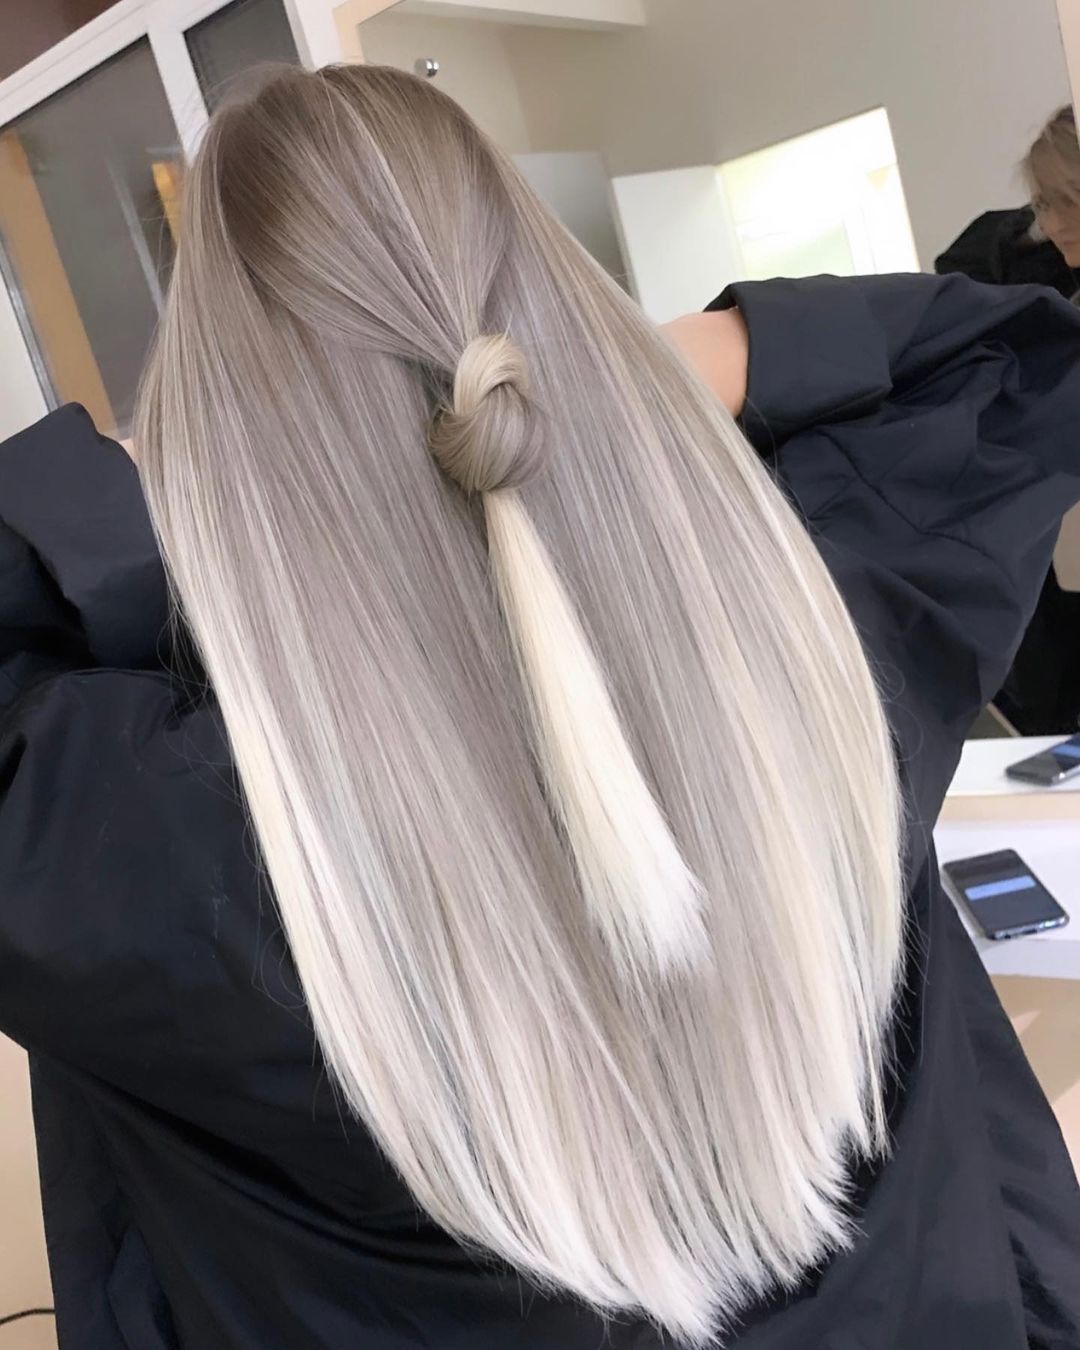 Stylish Long Hairstyles and Color - Women Long Hairstyle and Haircuts 2021